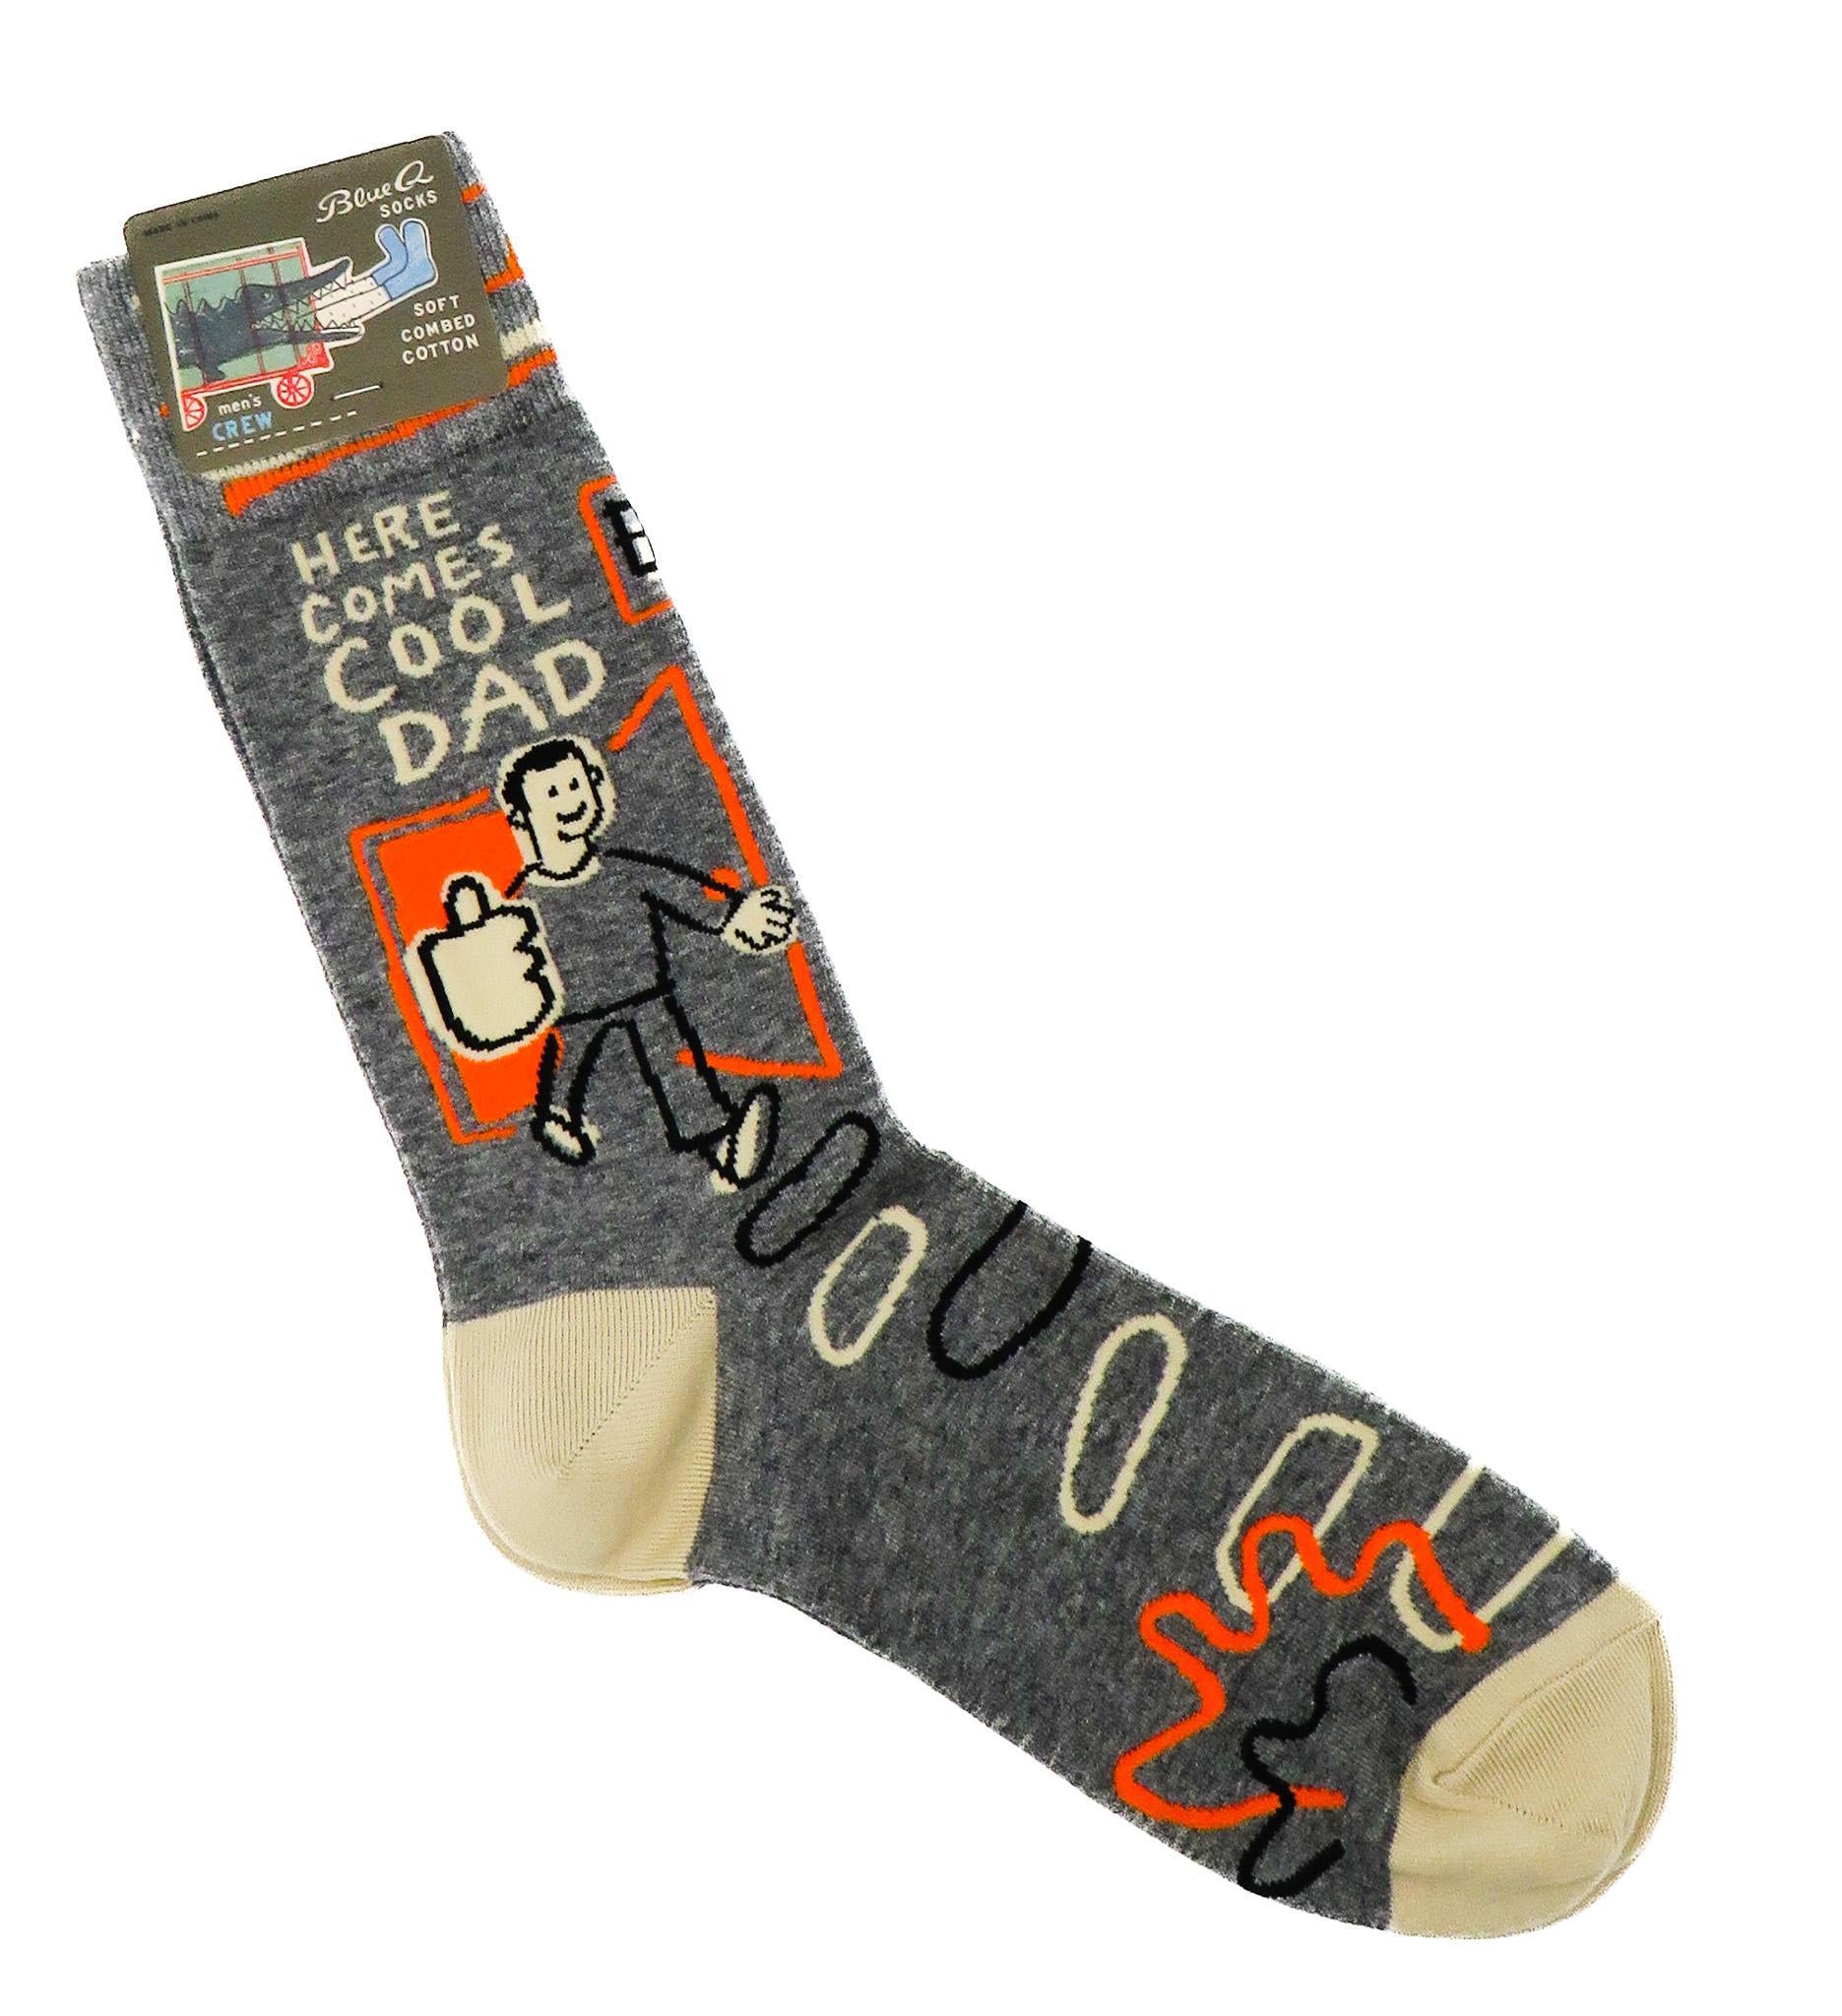 "Here Comes Cool Dad" Socks